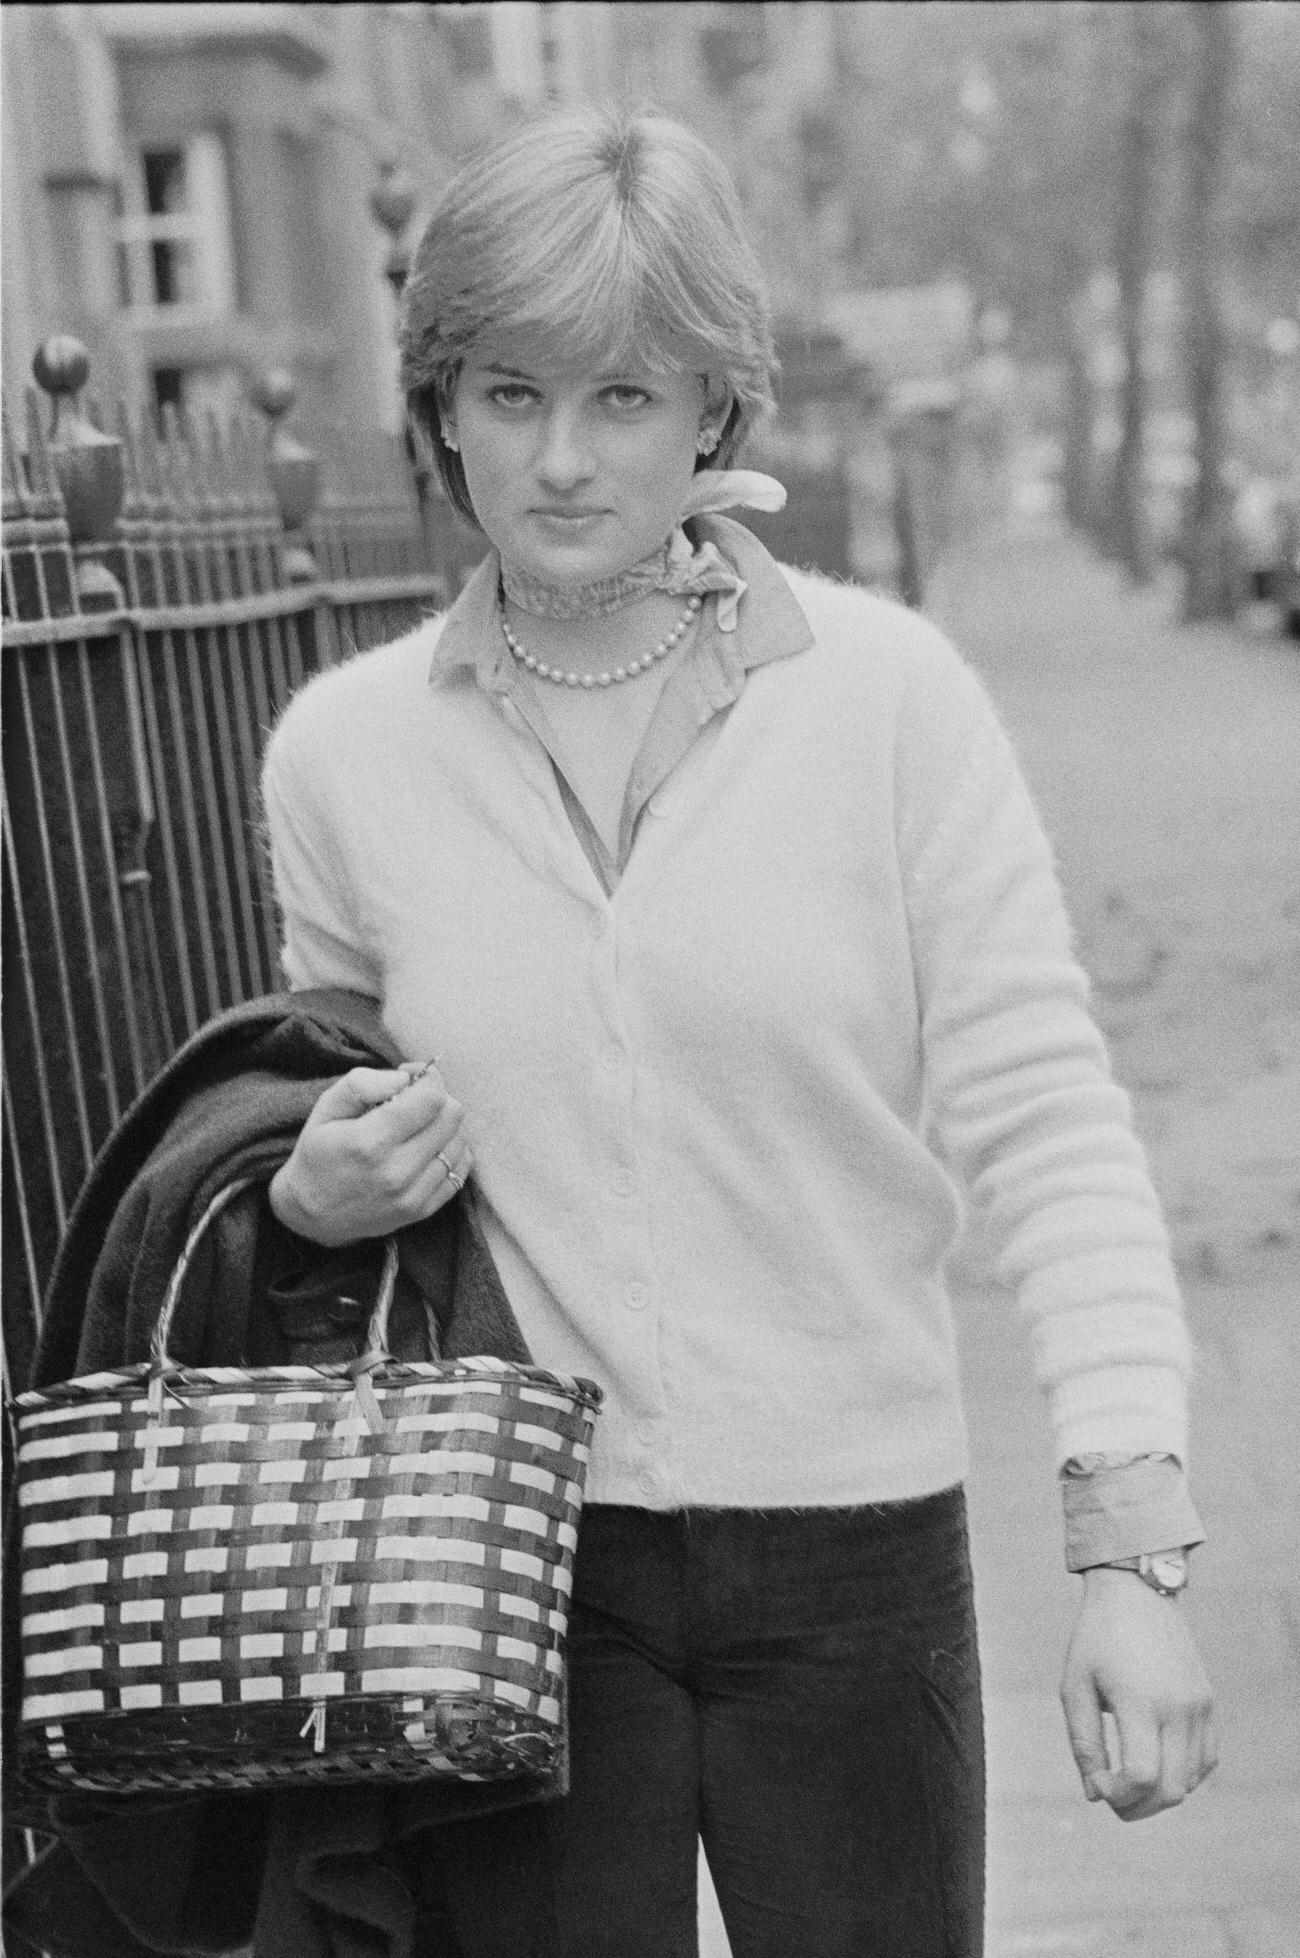 Lady Diana Spencer walking on a sidewalk holding her coat and handbag, she is wearing pale cardigan, shirt, neck-scarf and pearl necklace, London, 1980